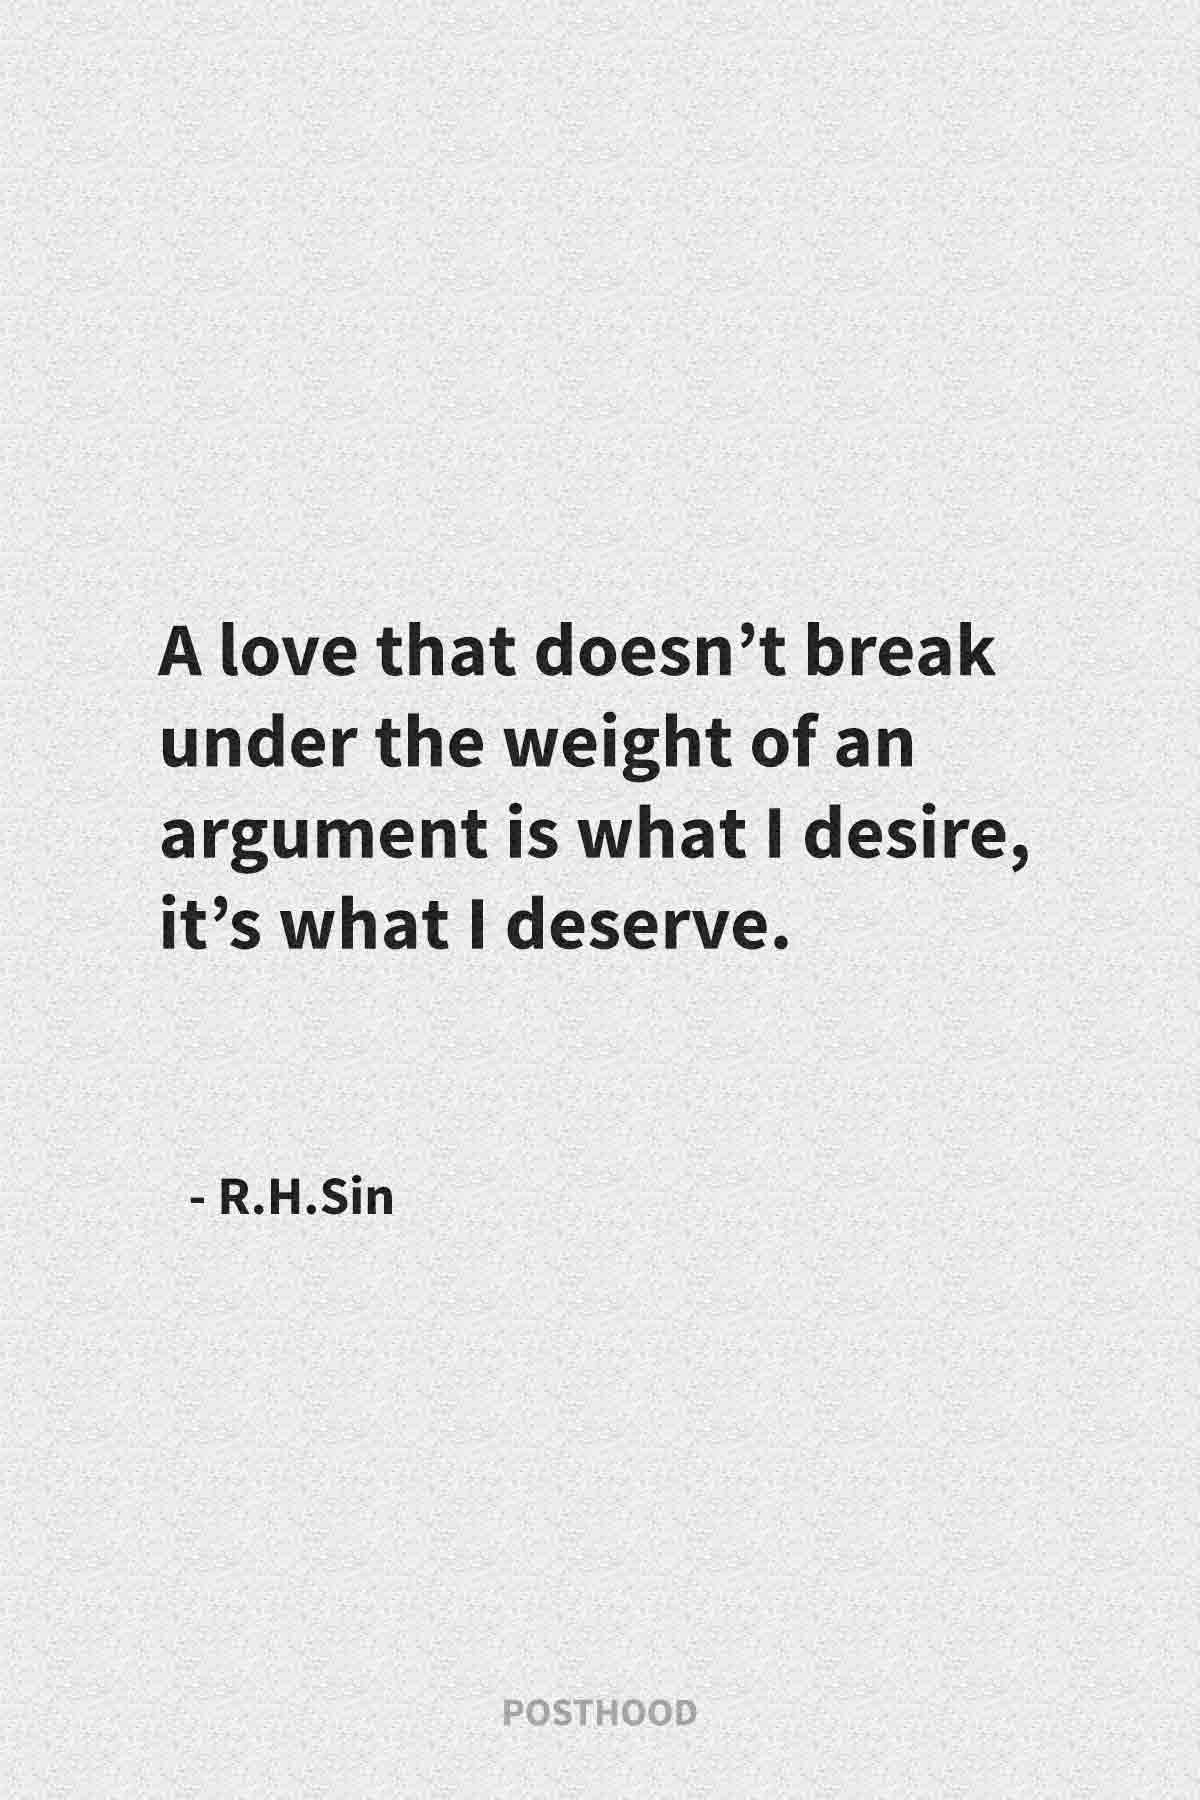 R.h. Sin's poetry covers how men should love women and how women should love themselves. Best relationship quotes and advice.